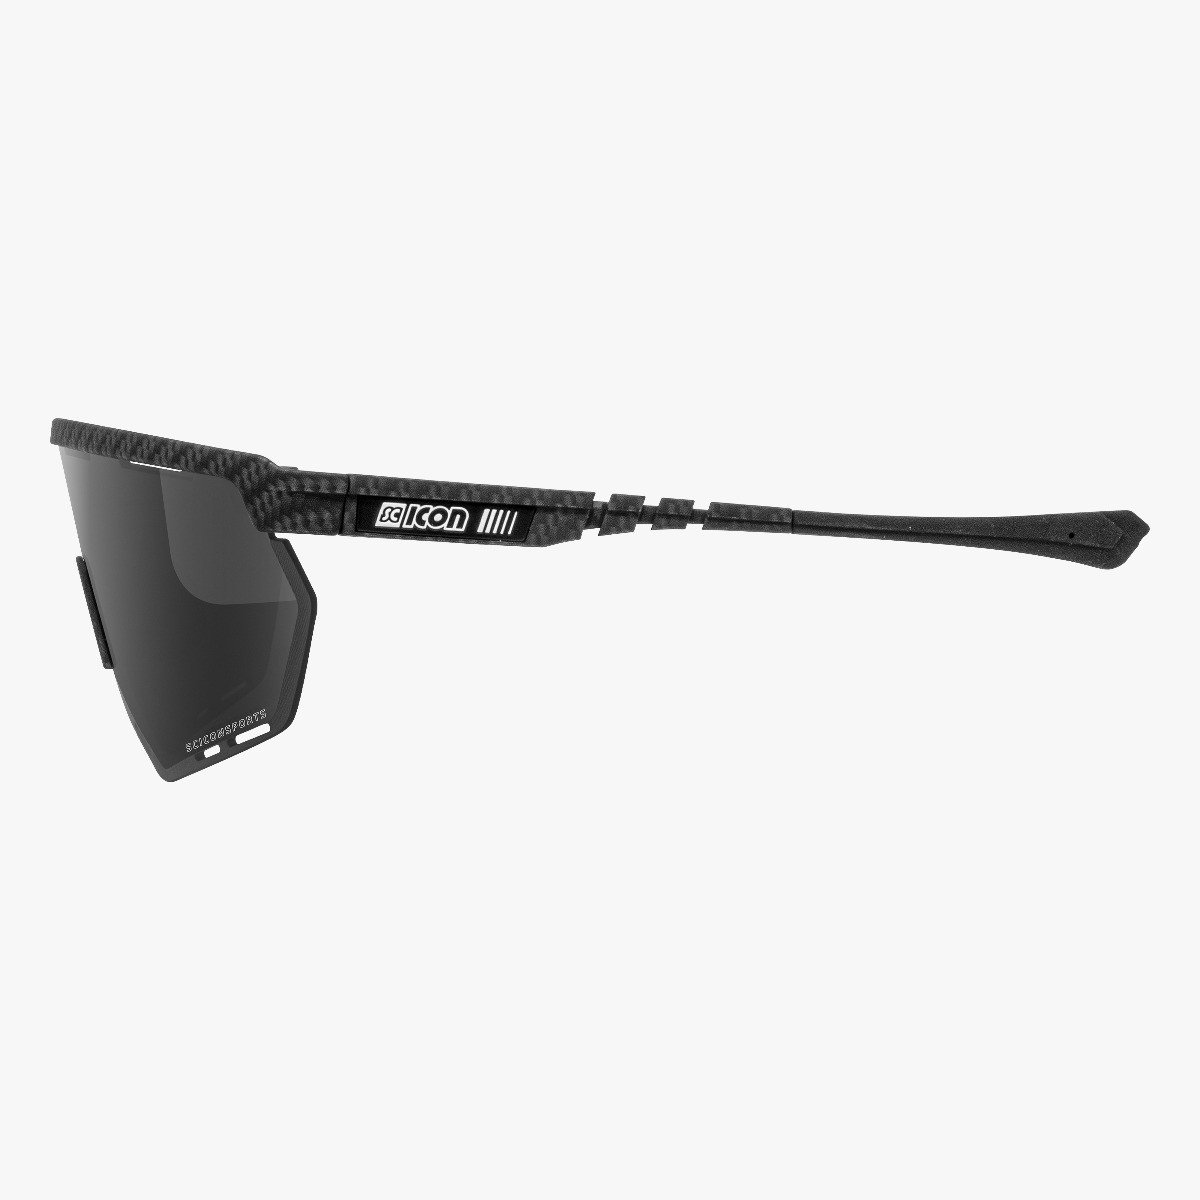 Scicon Sports | Aerowing Sport Performance Sunglasses - Carbon Matt / Photocromatic Silver - EY26011201